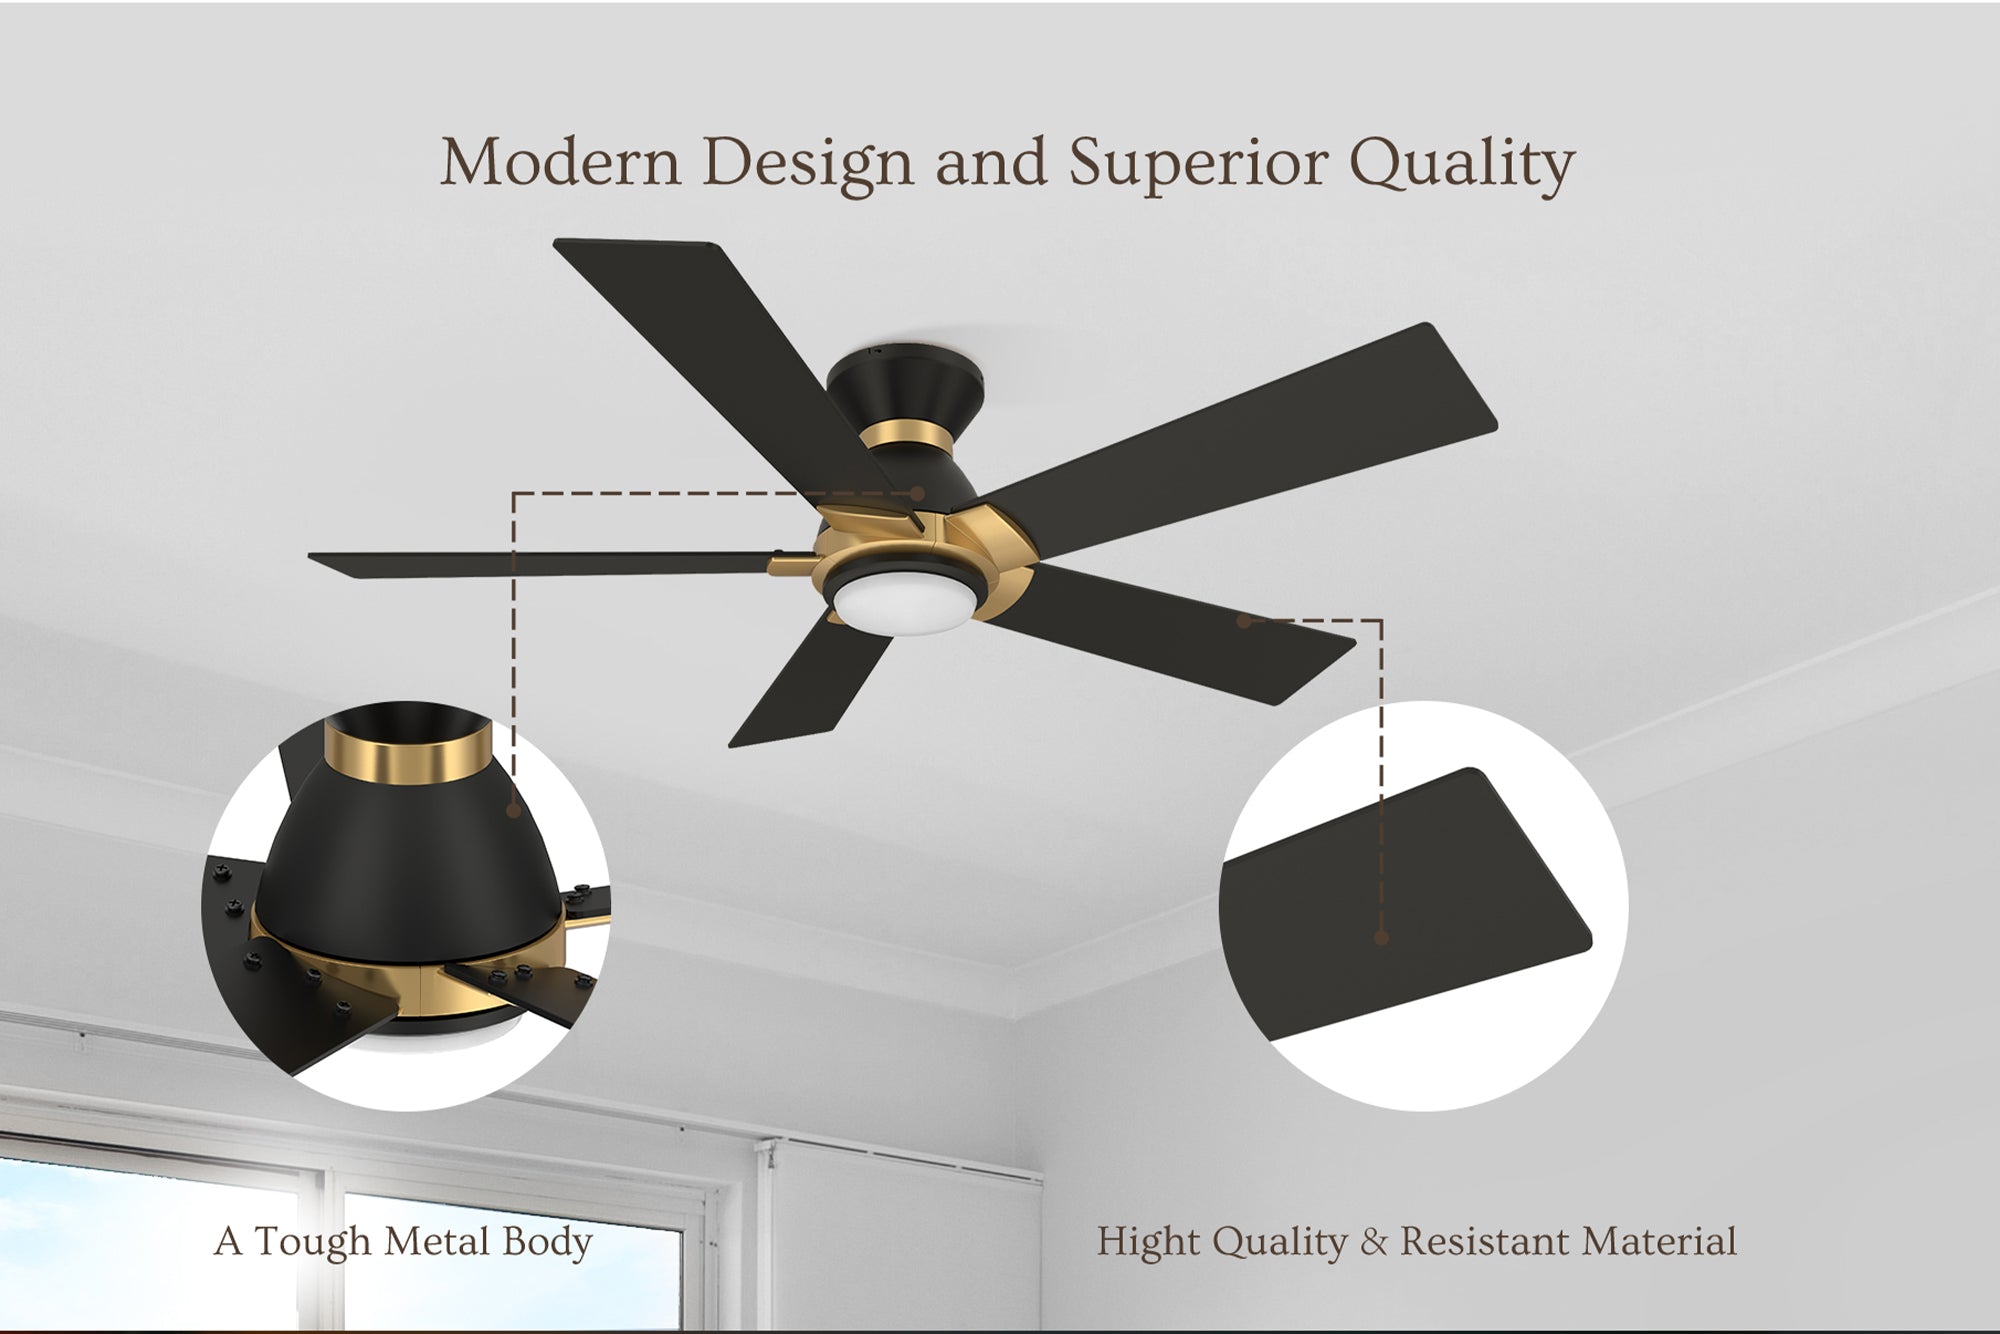 Carro-Smafan-Aspen-10-speed-Ceiling-Fan-with-Remote-and-Reversible-Fan-Blades-brilliant-upscale-design-good-Reliable-Finest-Material